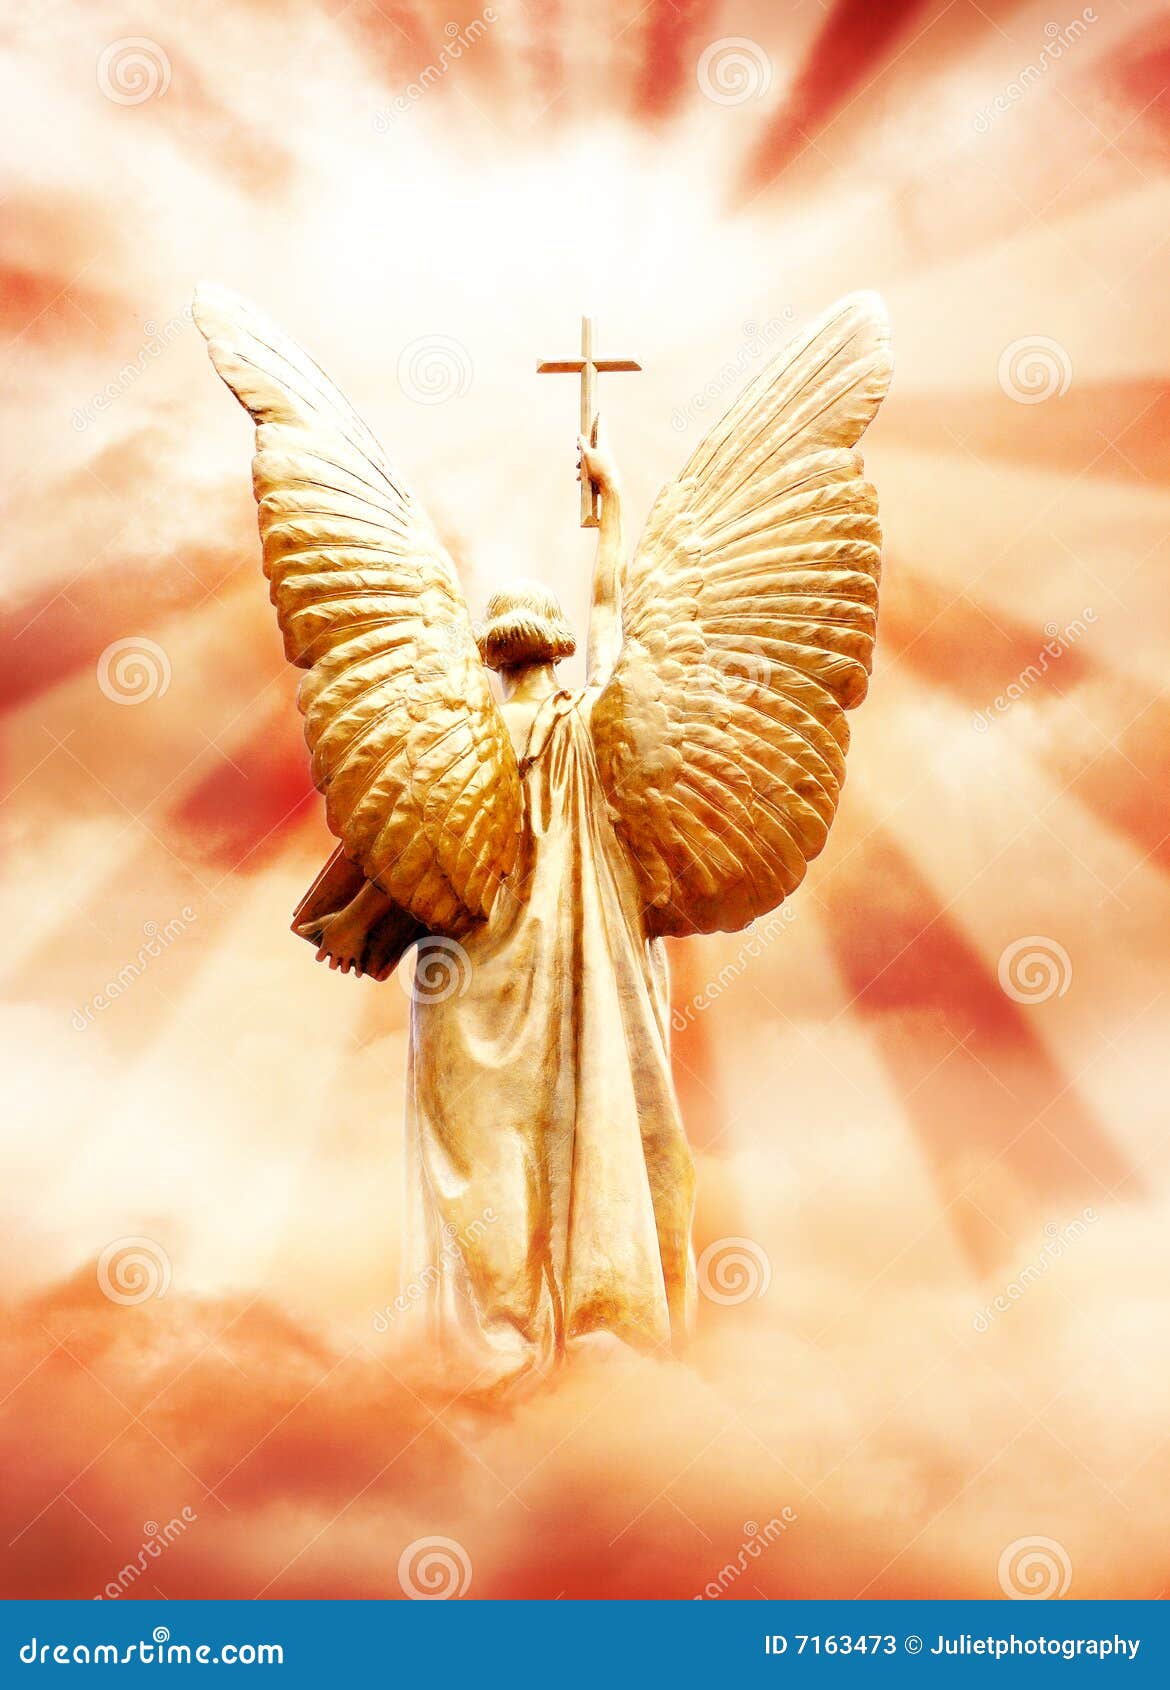 Gods Angel With The Cross Stock Photos - Image: 7163473